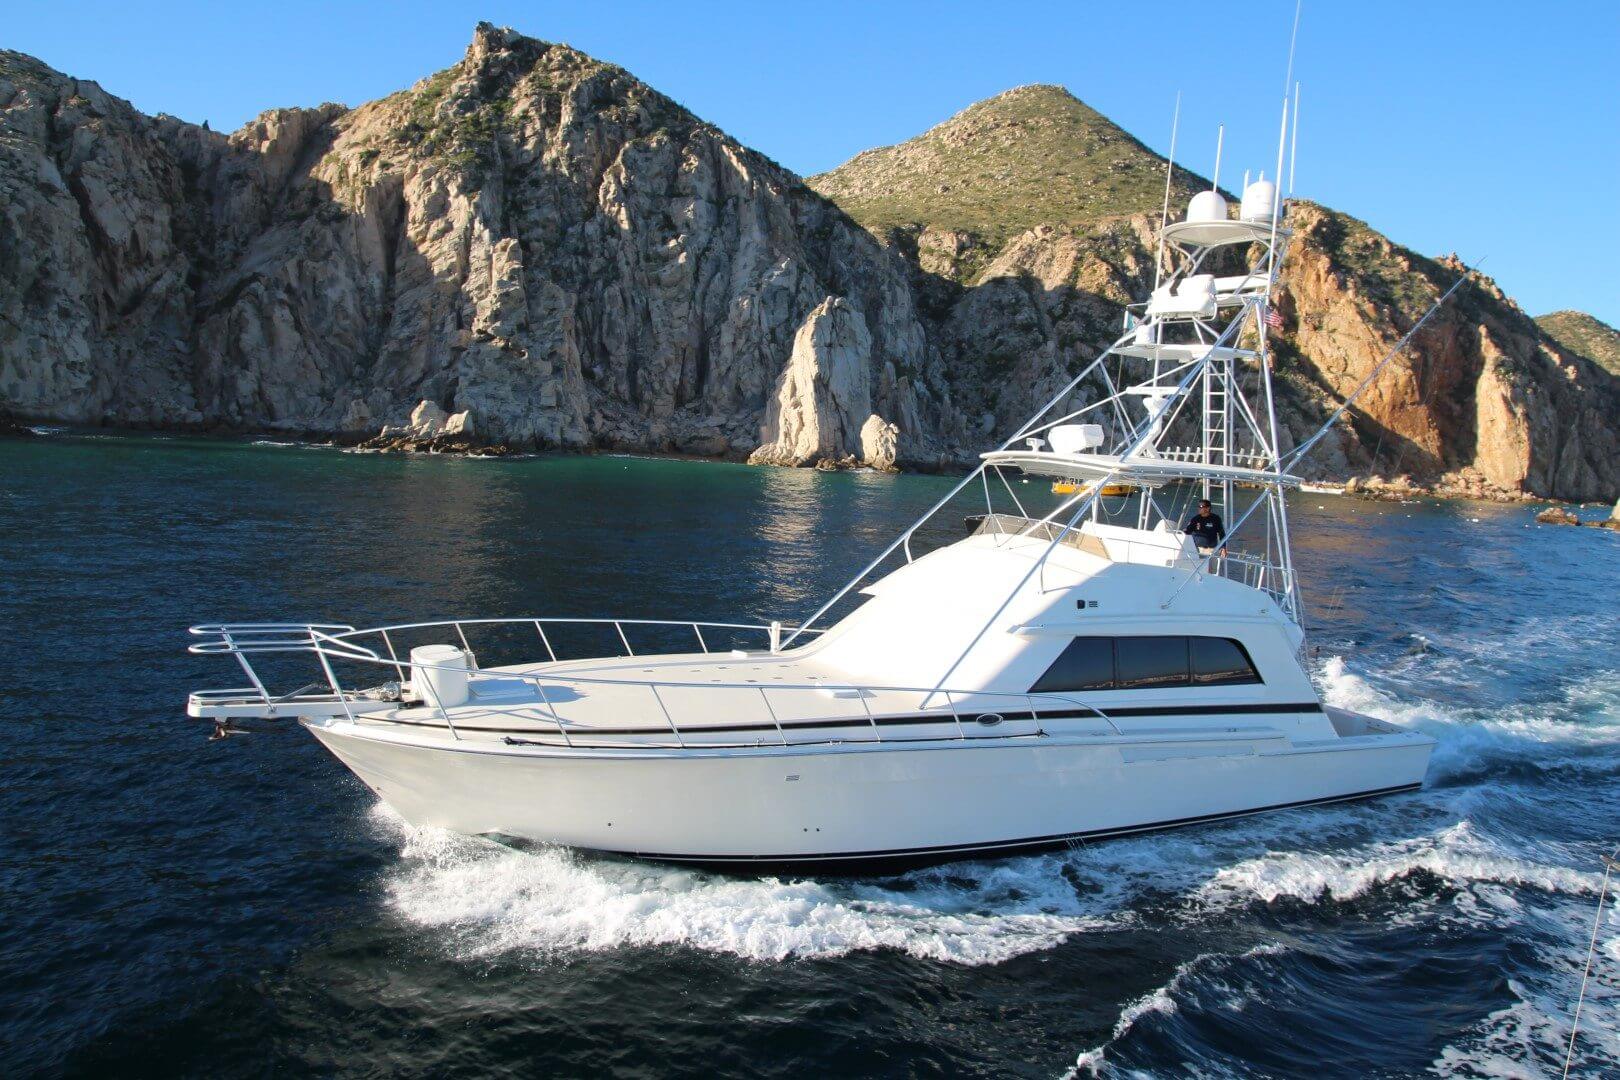 Sail Away with Diego Party Boat Rentals from Mai Tai Yacht Charters